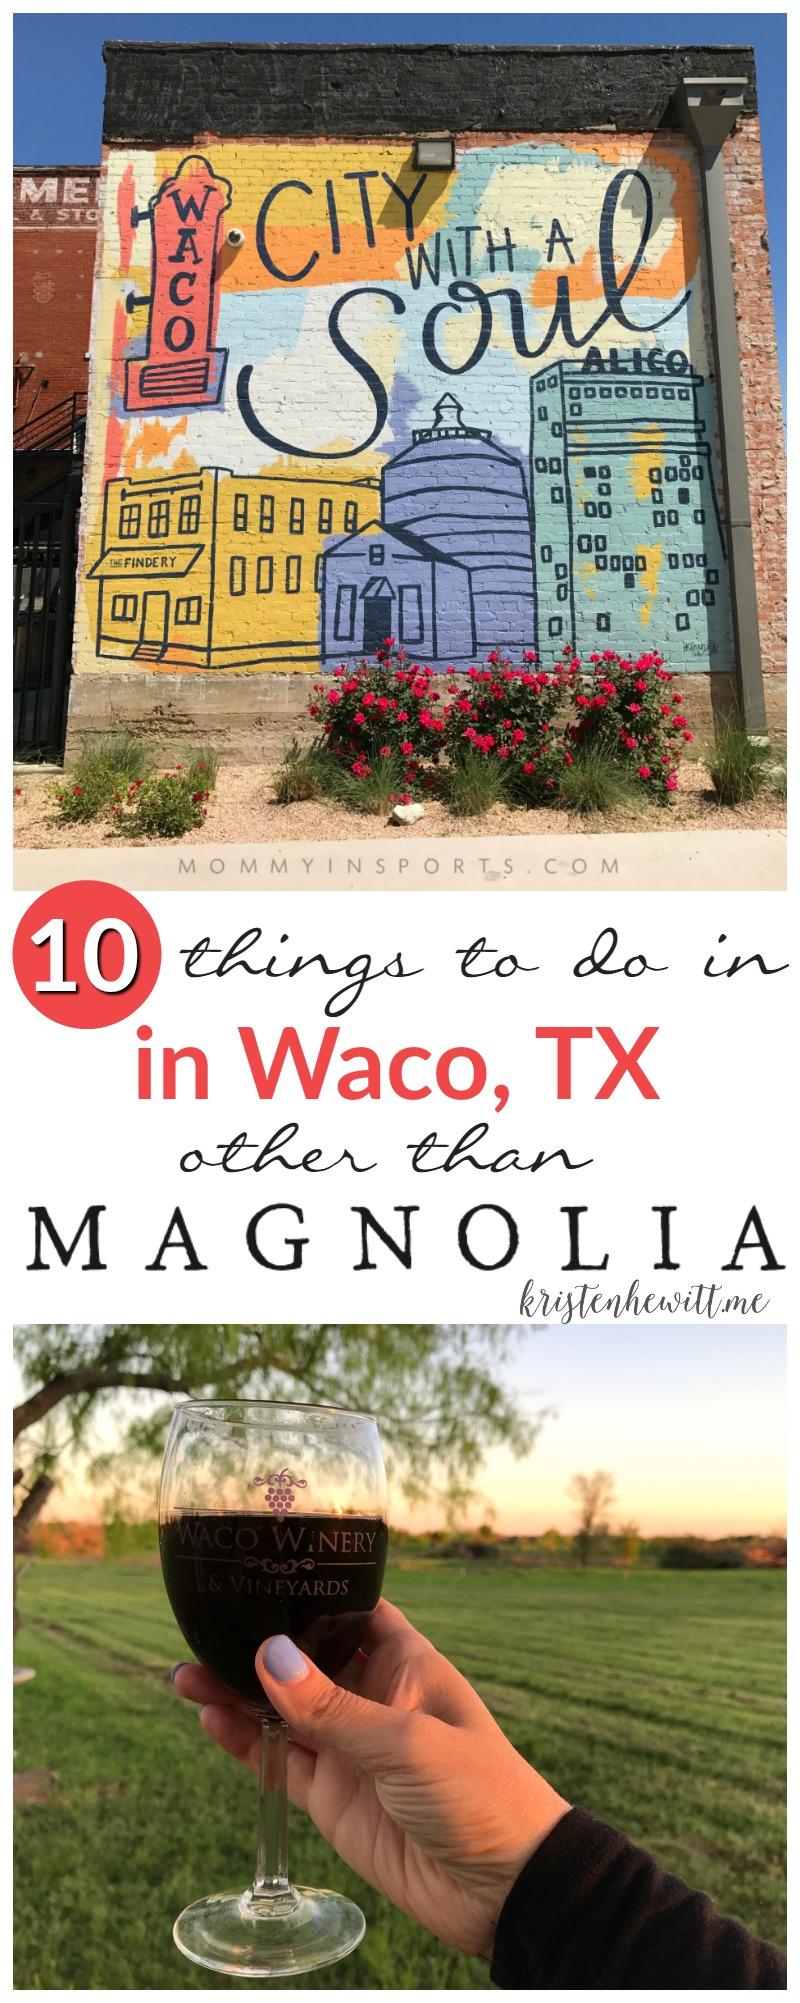 Are you heading to Waco for a Magnolia adventure? Here are some things you can